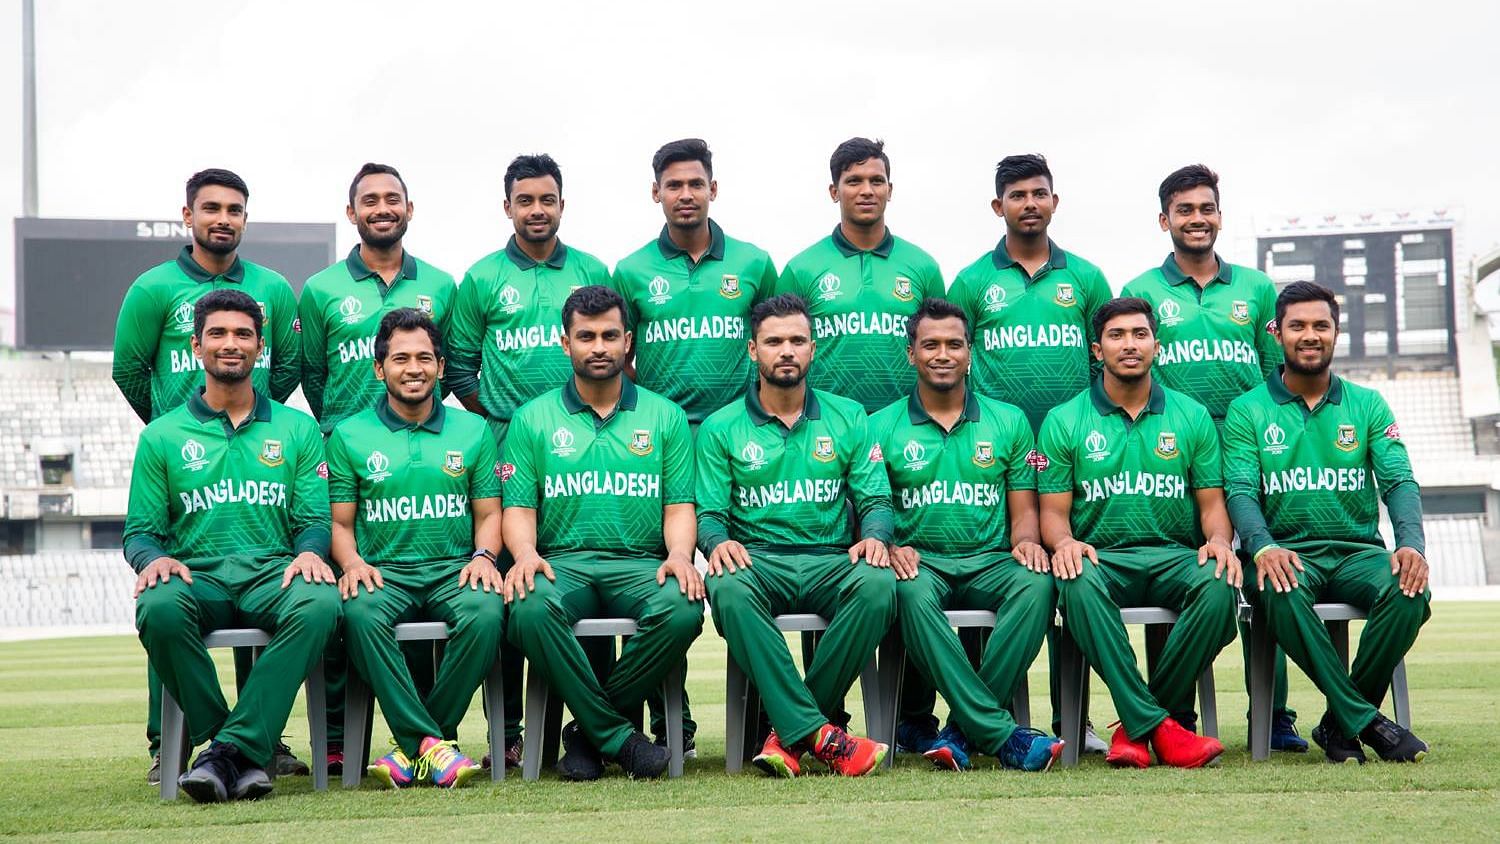 The Bangladesh cricket team competing at the 2019 ICC World Cup.